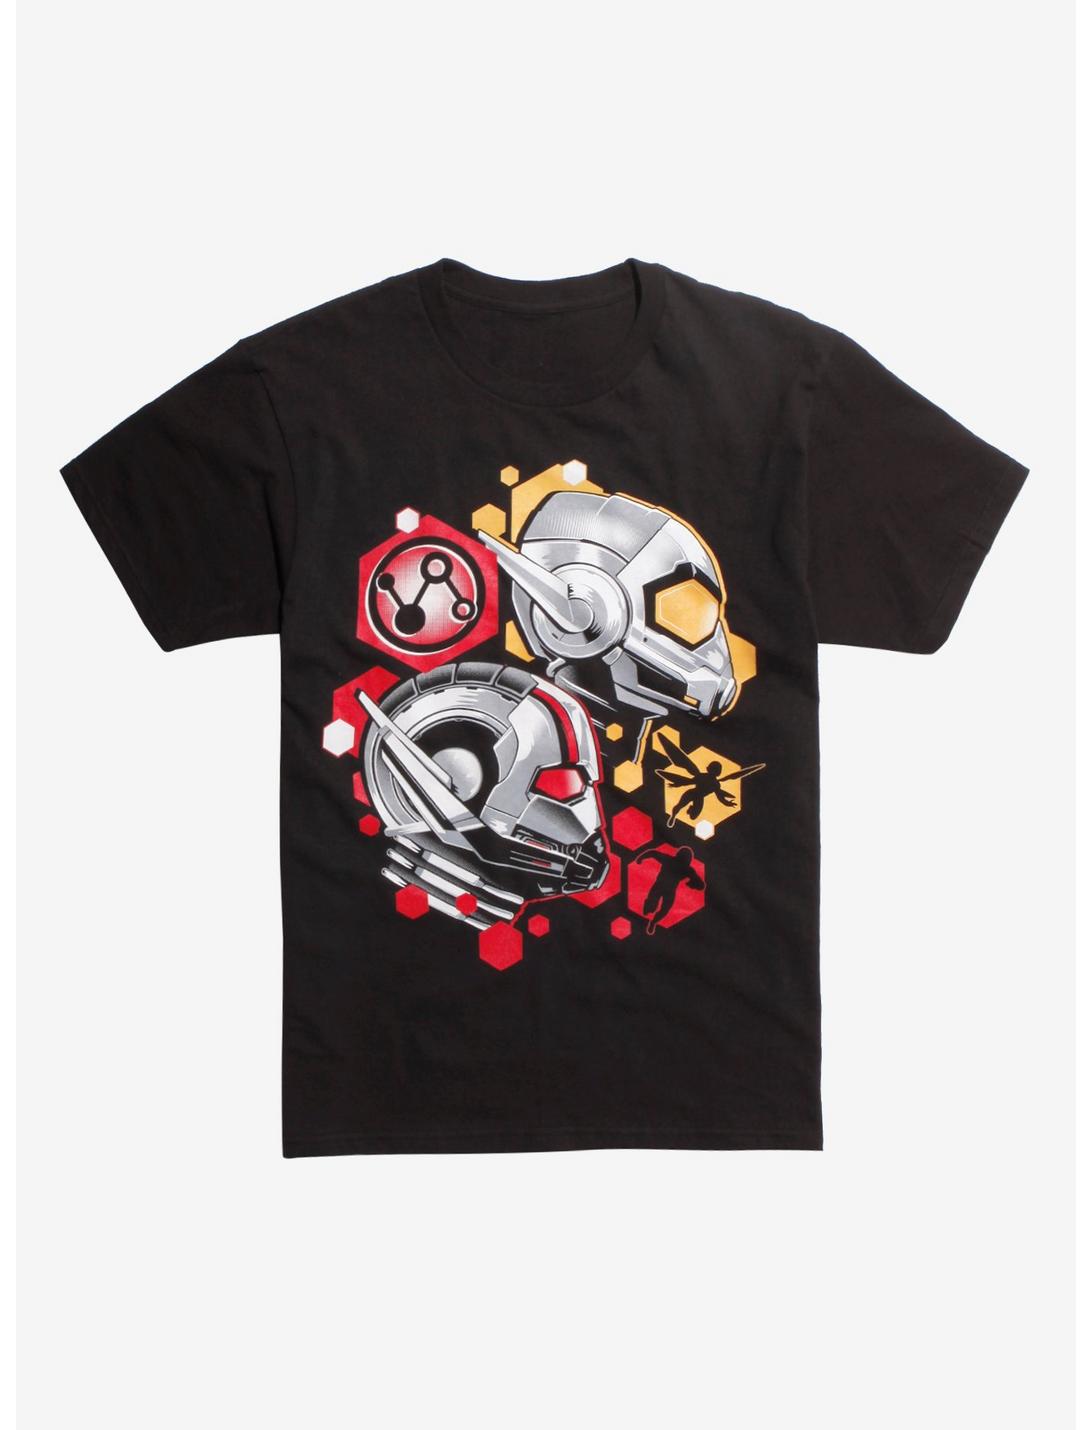 Marvel Ant-Man And The Wasp Helmets T-Shirt Hot Topic Exclusive, BLACK, hi-res